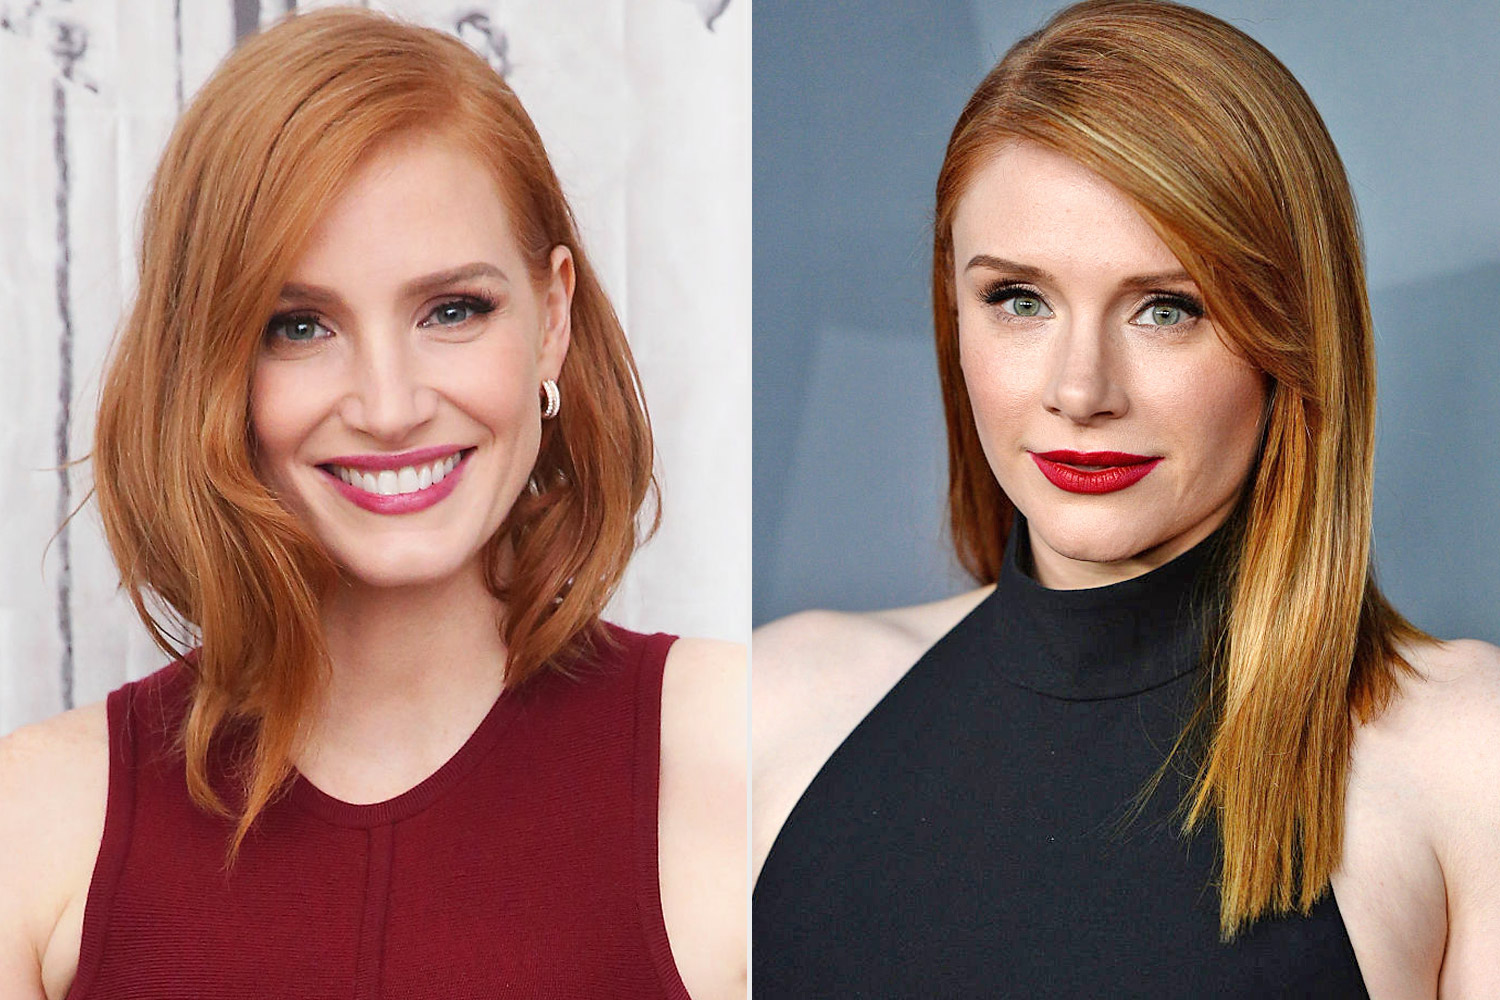 FULL STORY Jessica Chastain Reminds Fans She's Not Bryce Dallas Howard...